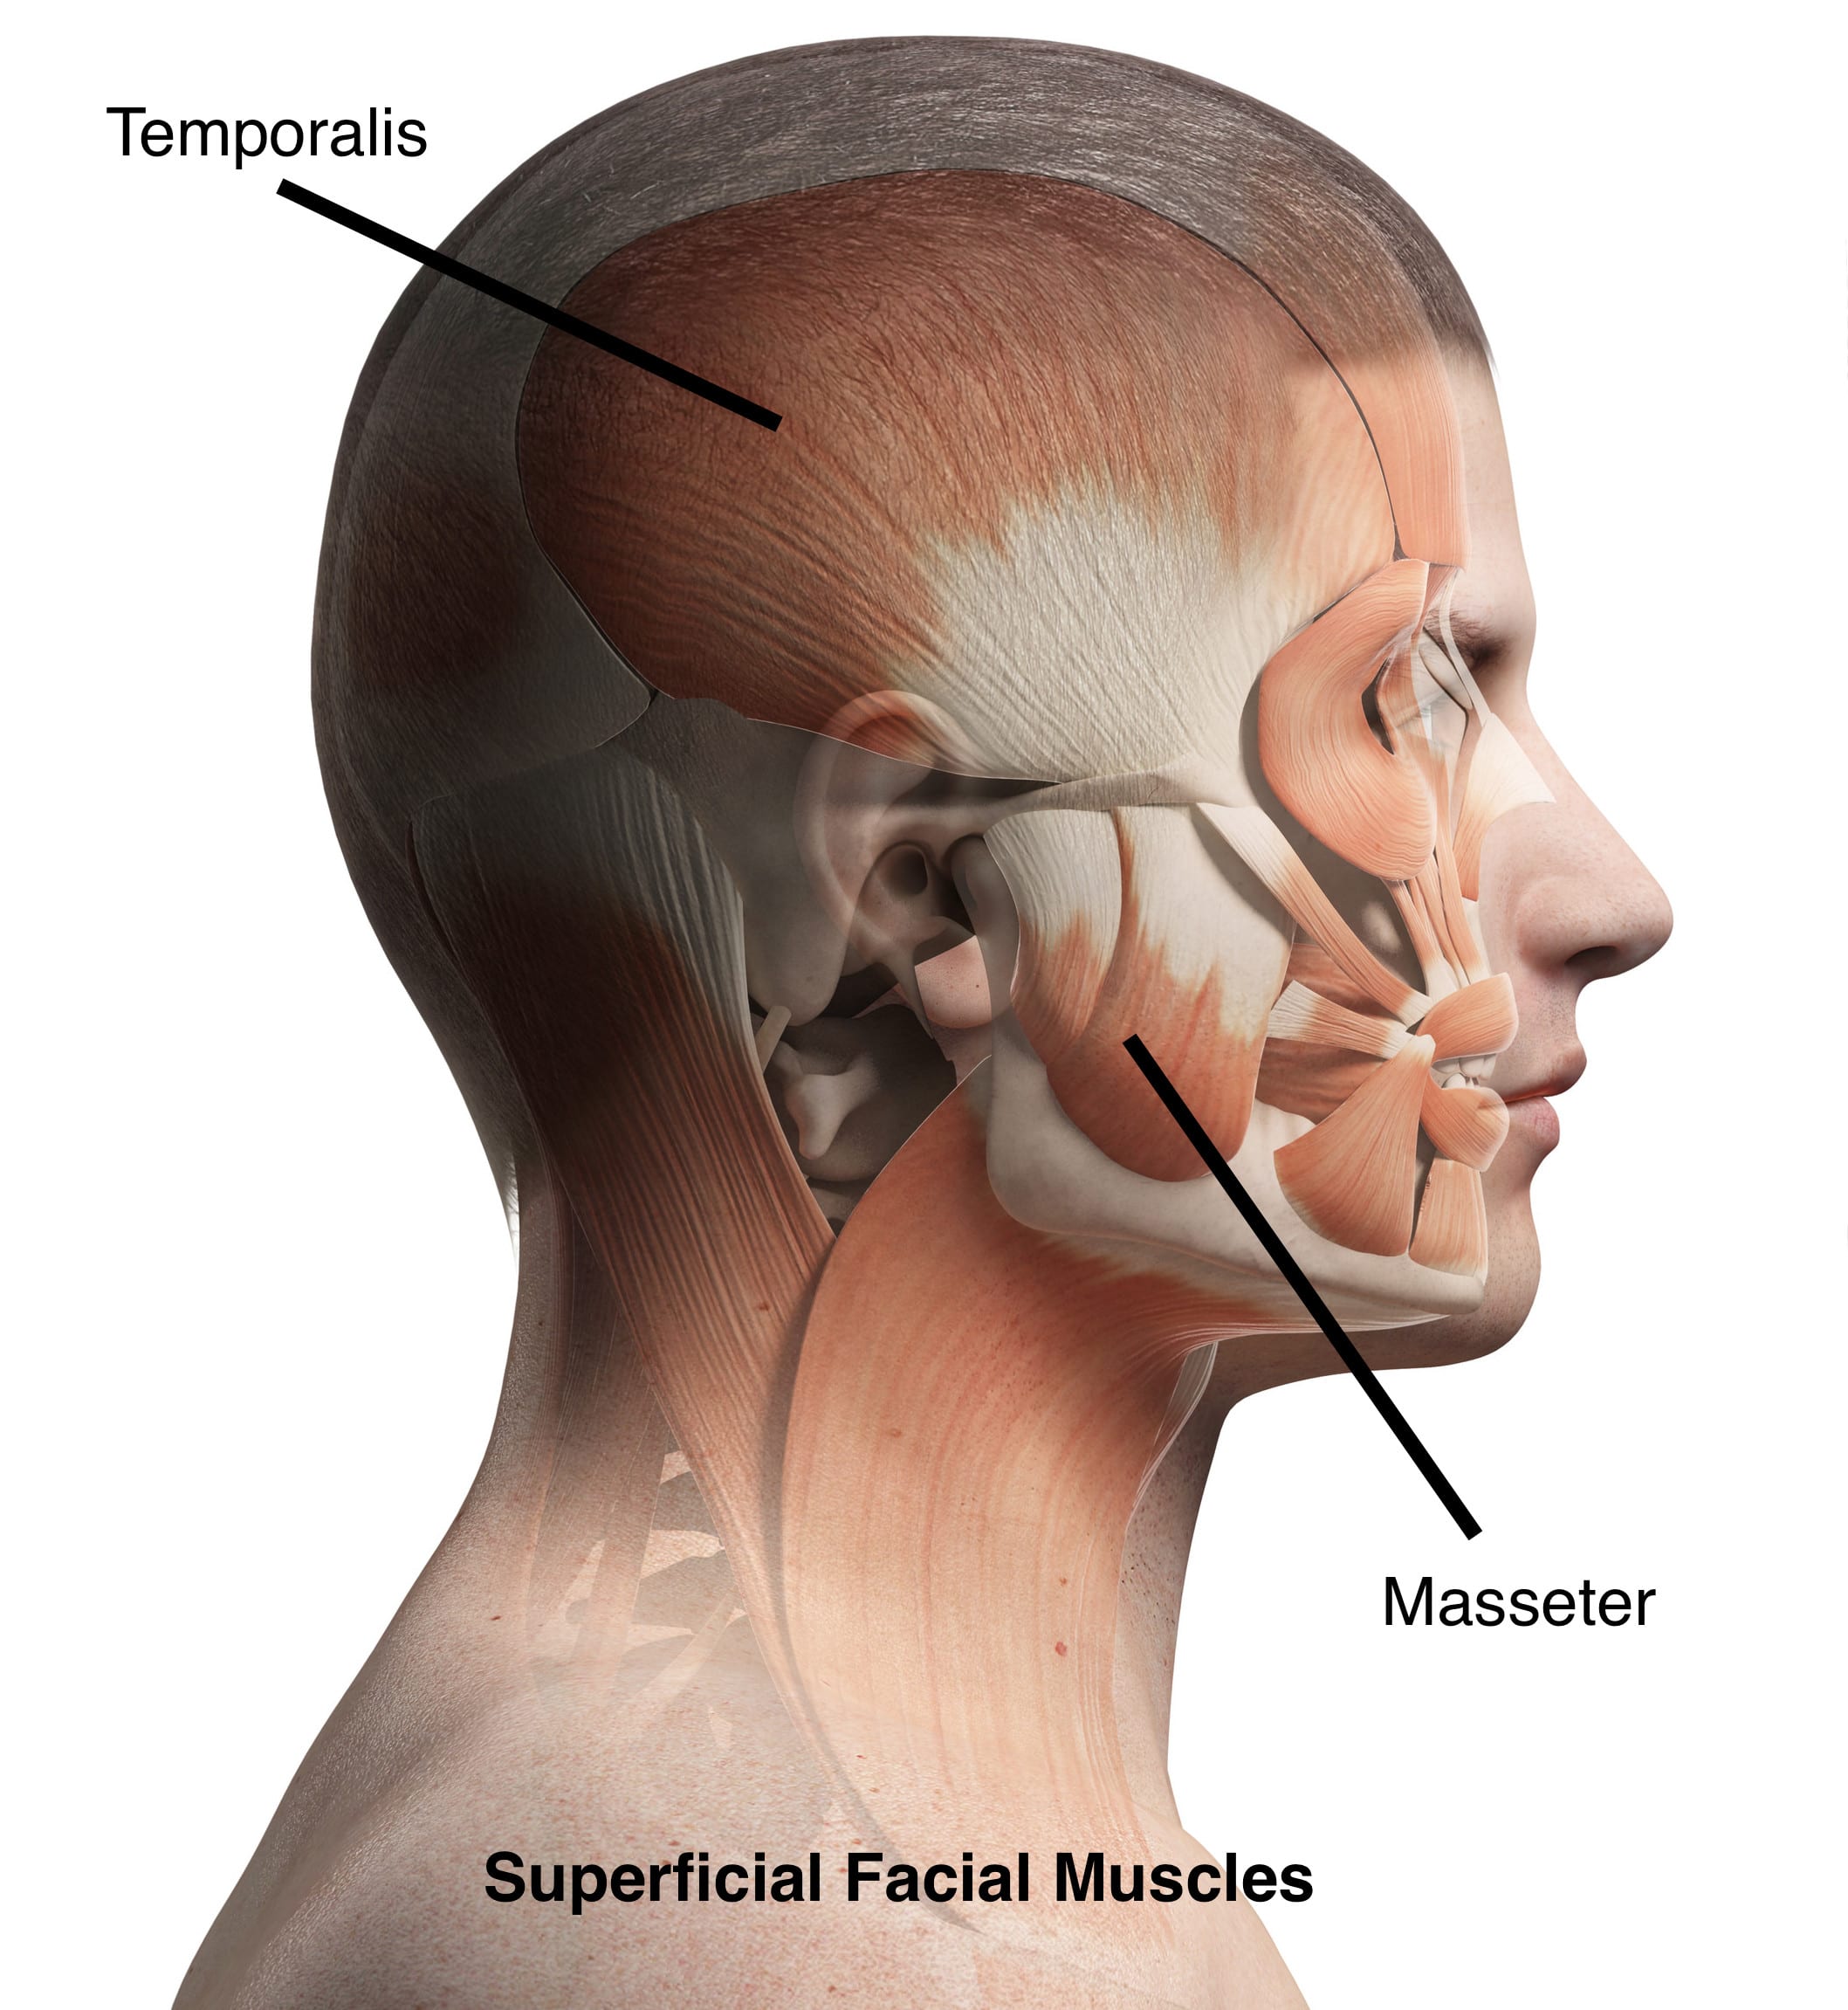 anatomy of the TMJ and muscles of the head illustration boston tmj specialist